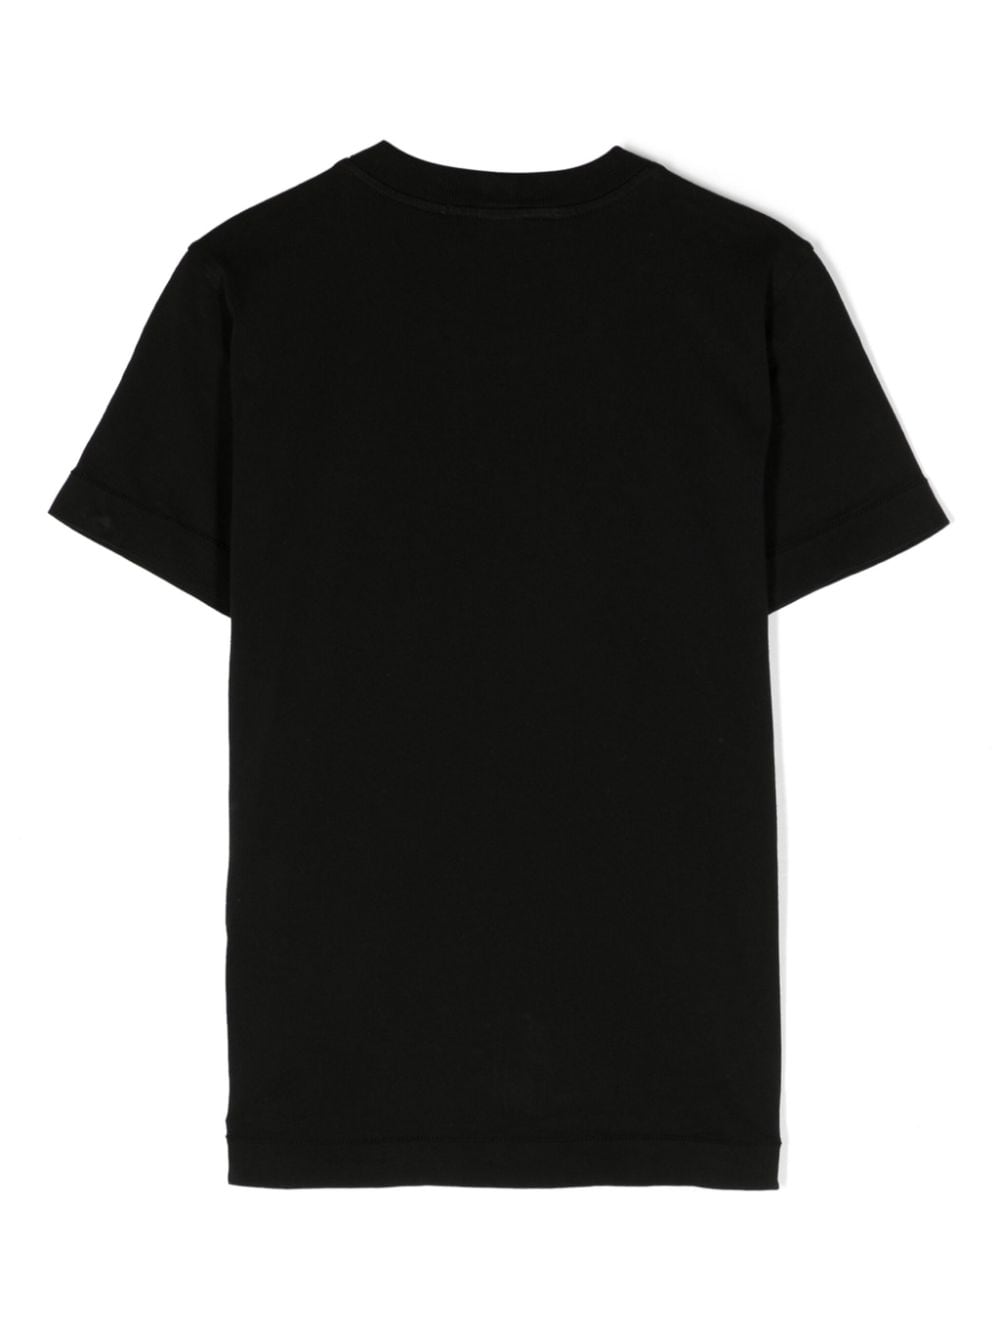 Black t-shirt for boys with logo